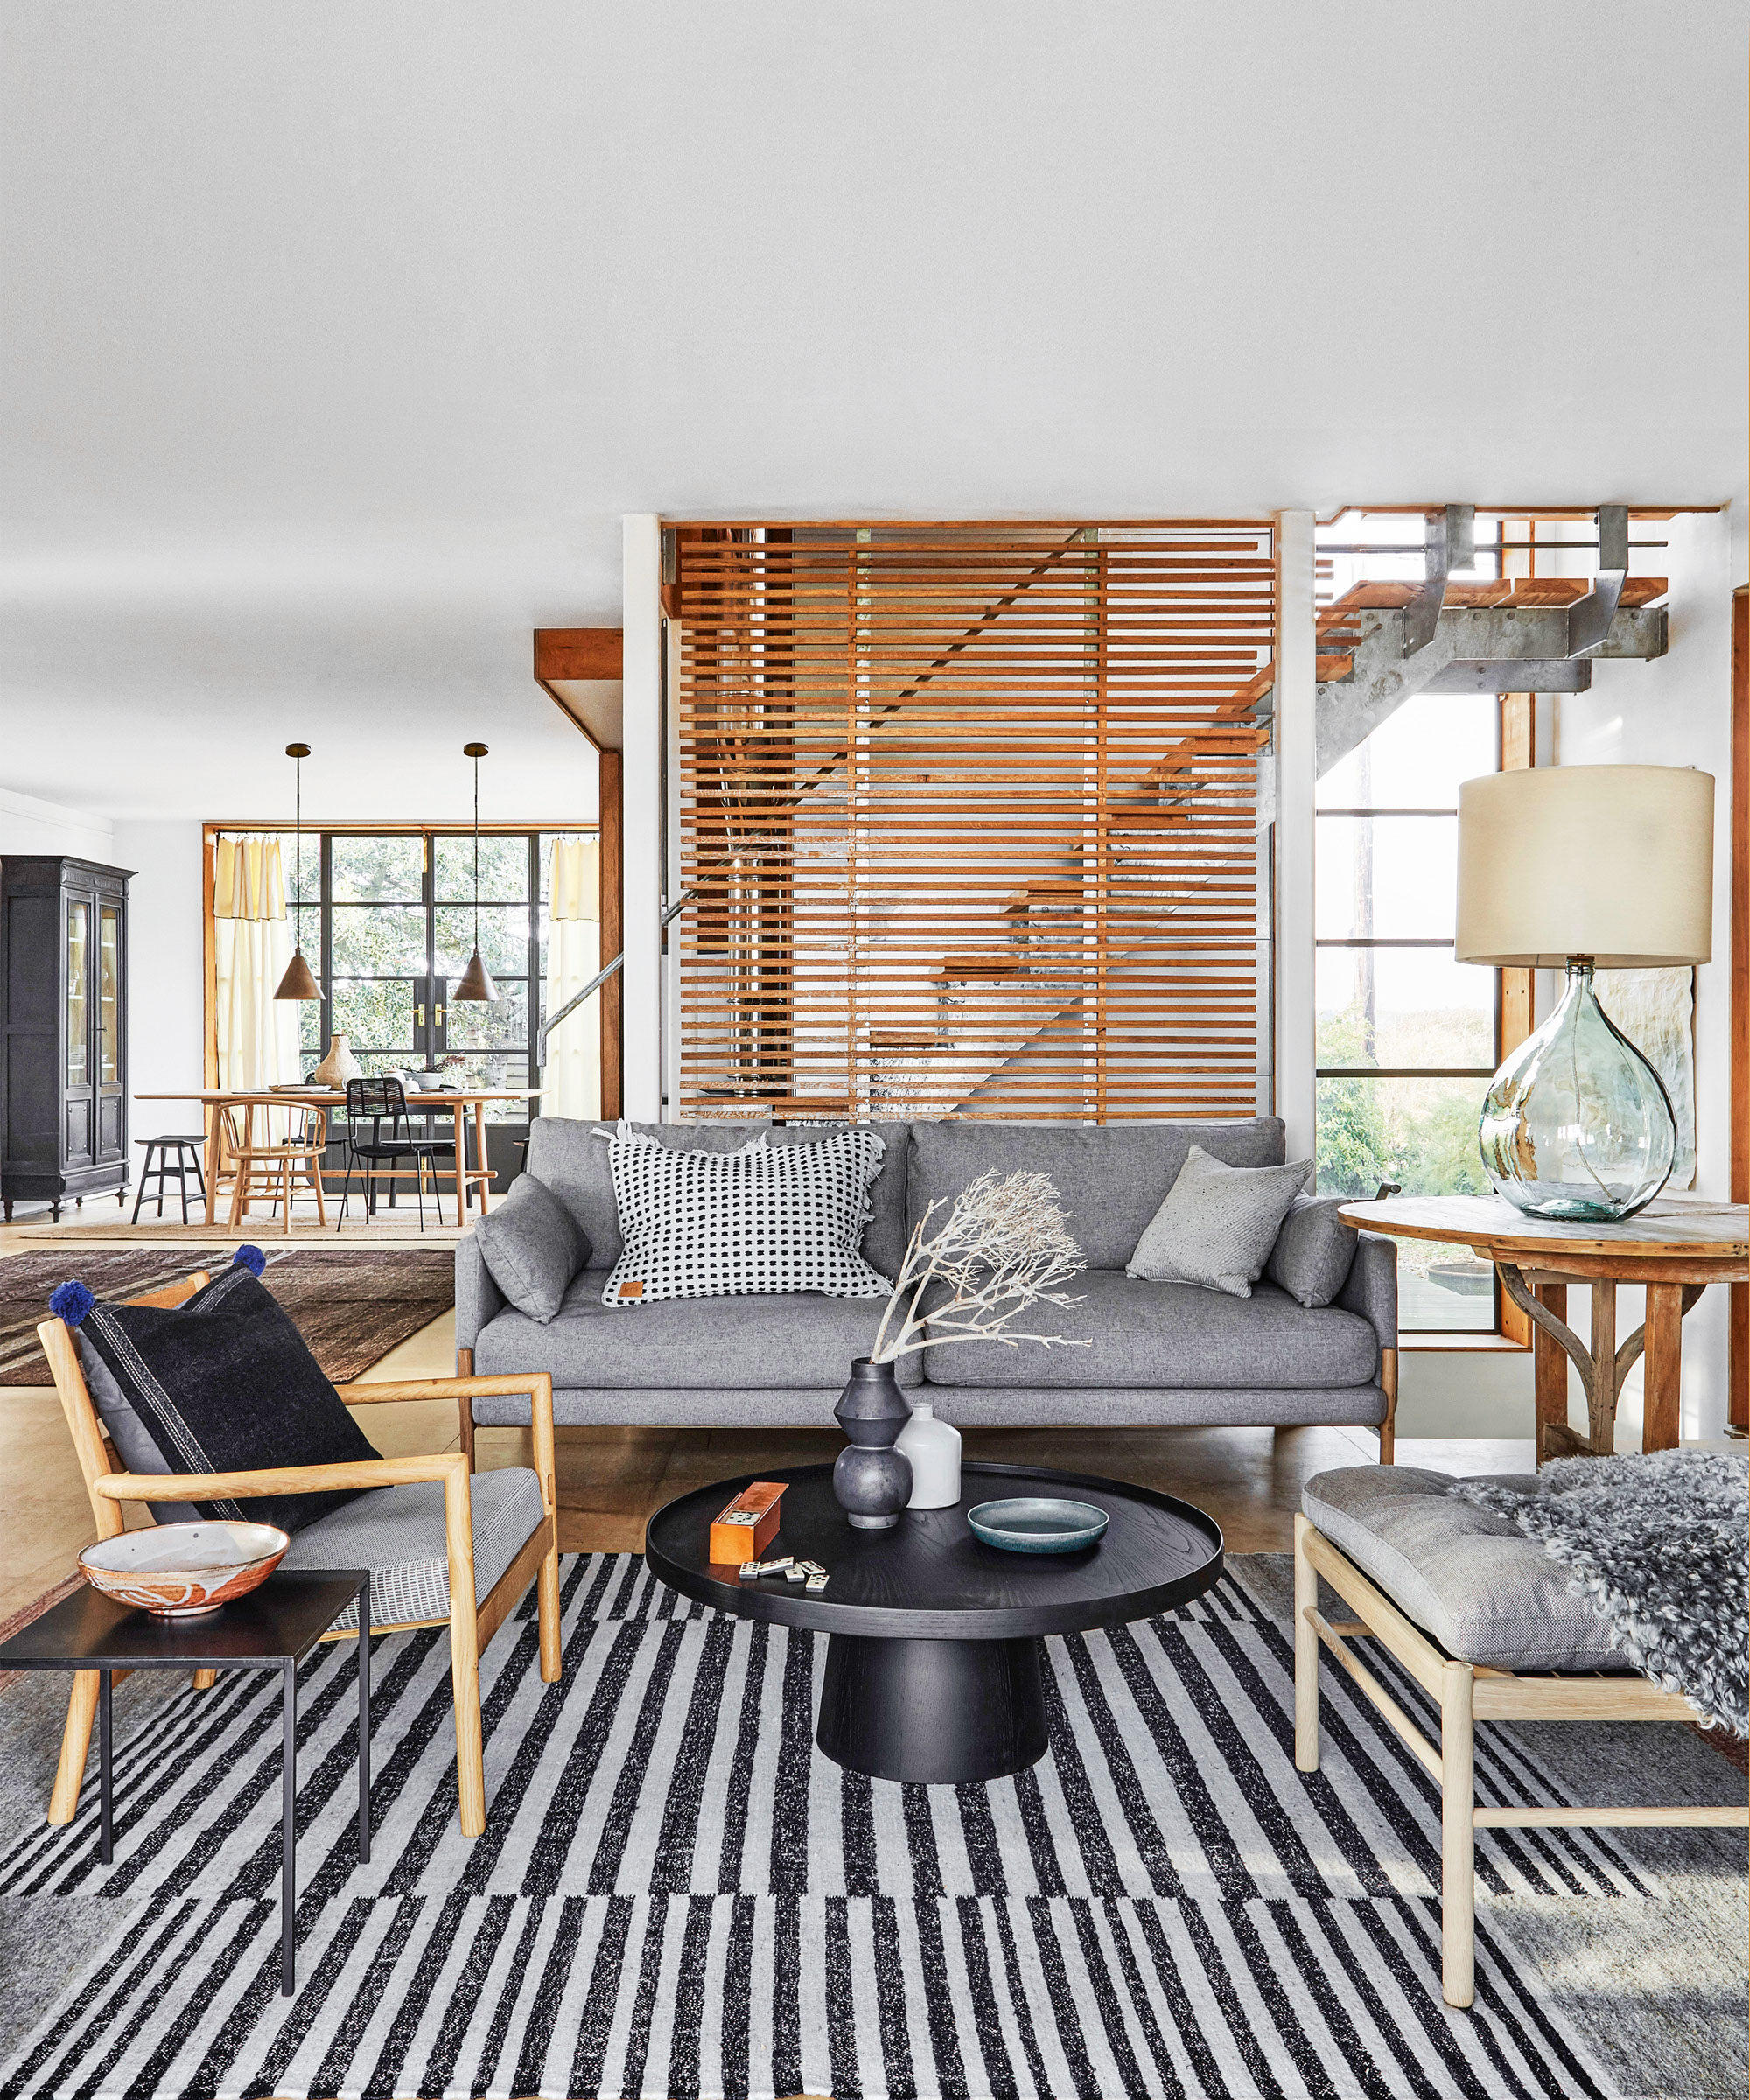 Large open-plan living room with gray and wood seating, striped rug, wooden fluted accents